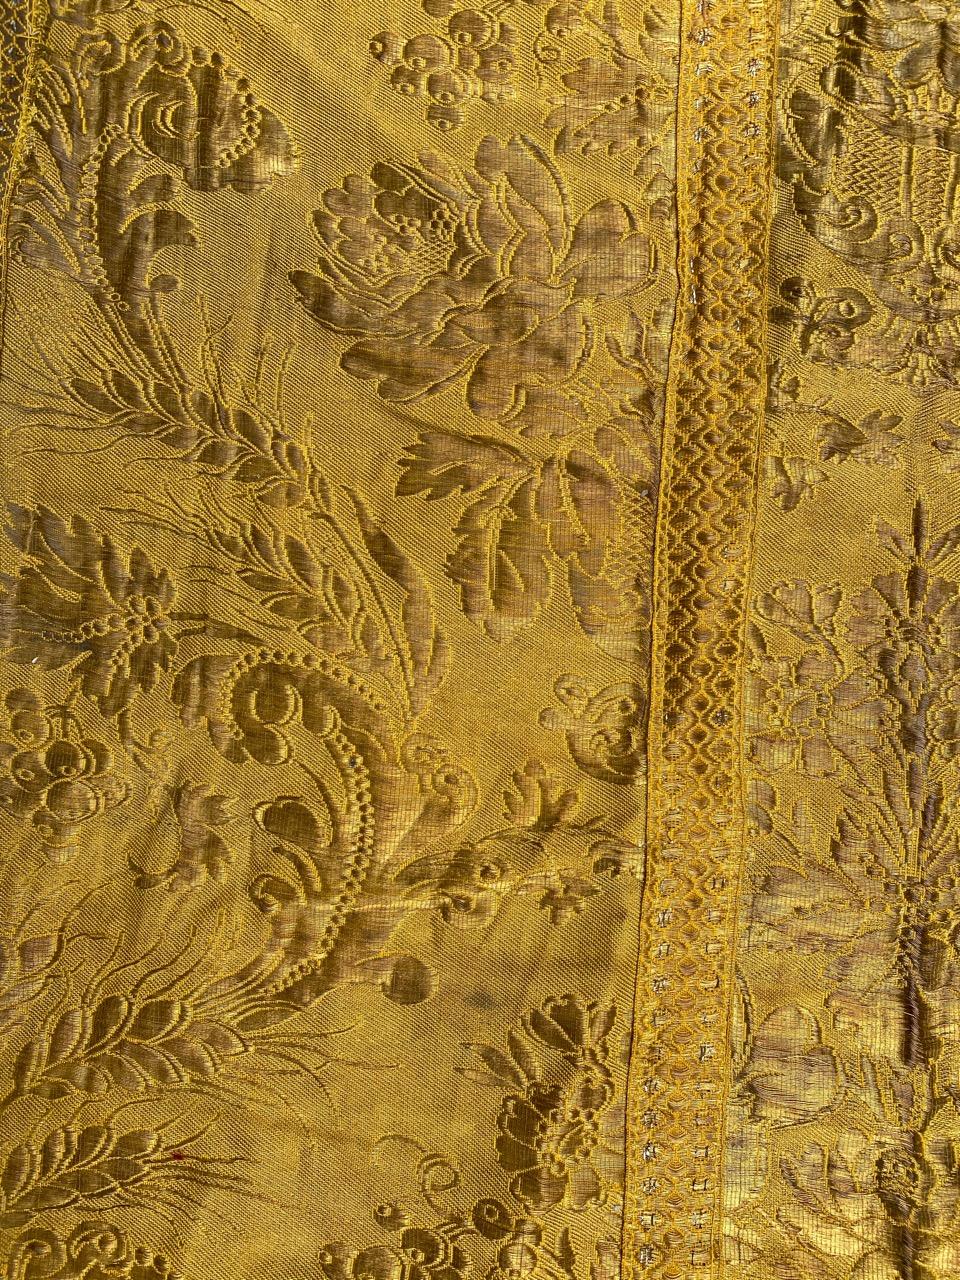 Other Antique French Golden Chasuble